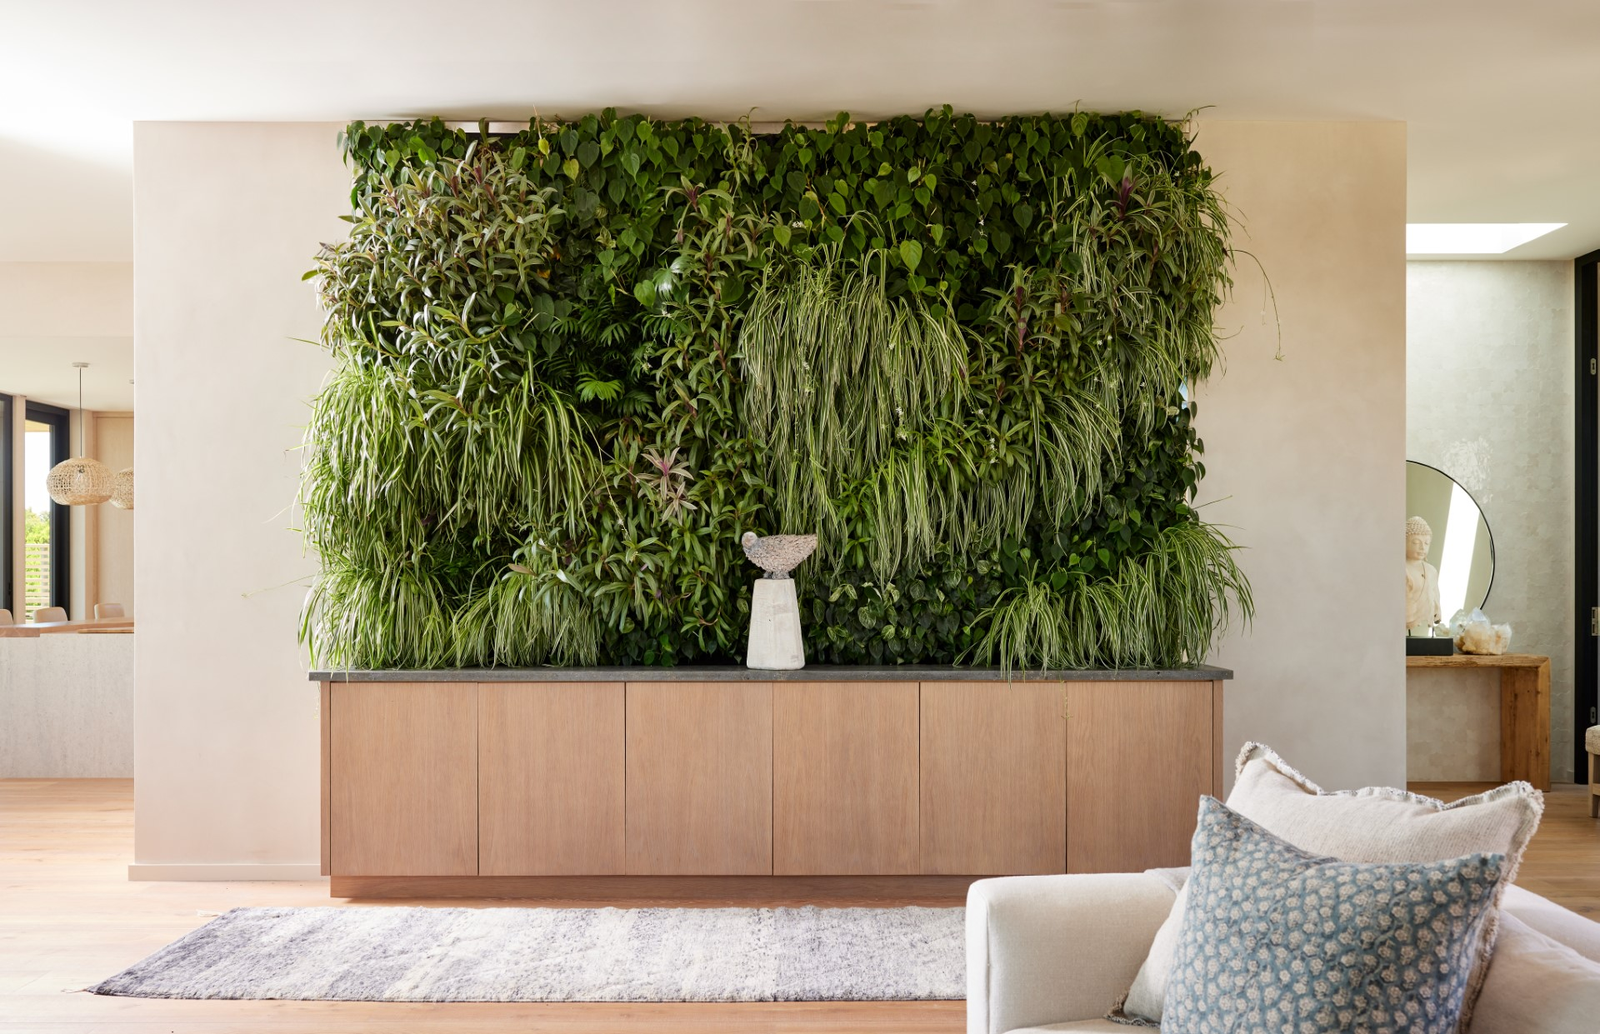 A living plant wall featured in a Skornicka Designs amp Construction Inc. project pictured with a True Guardian...